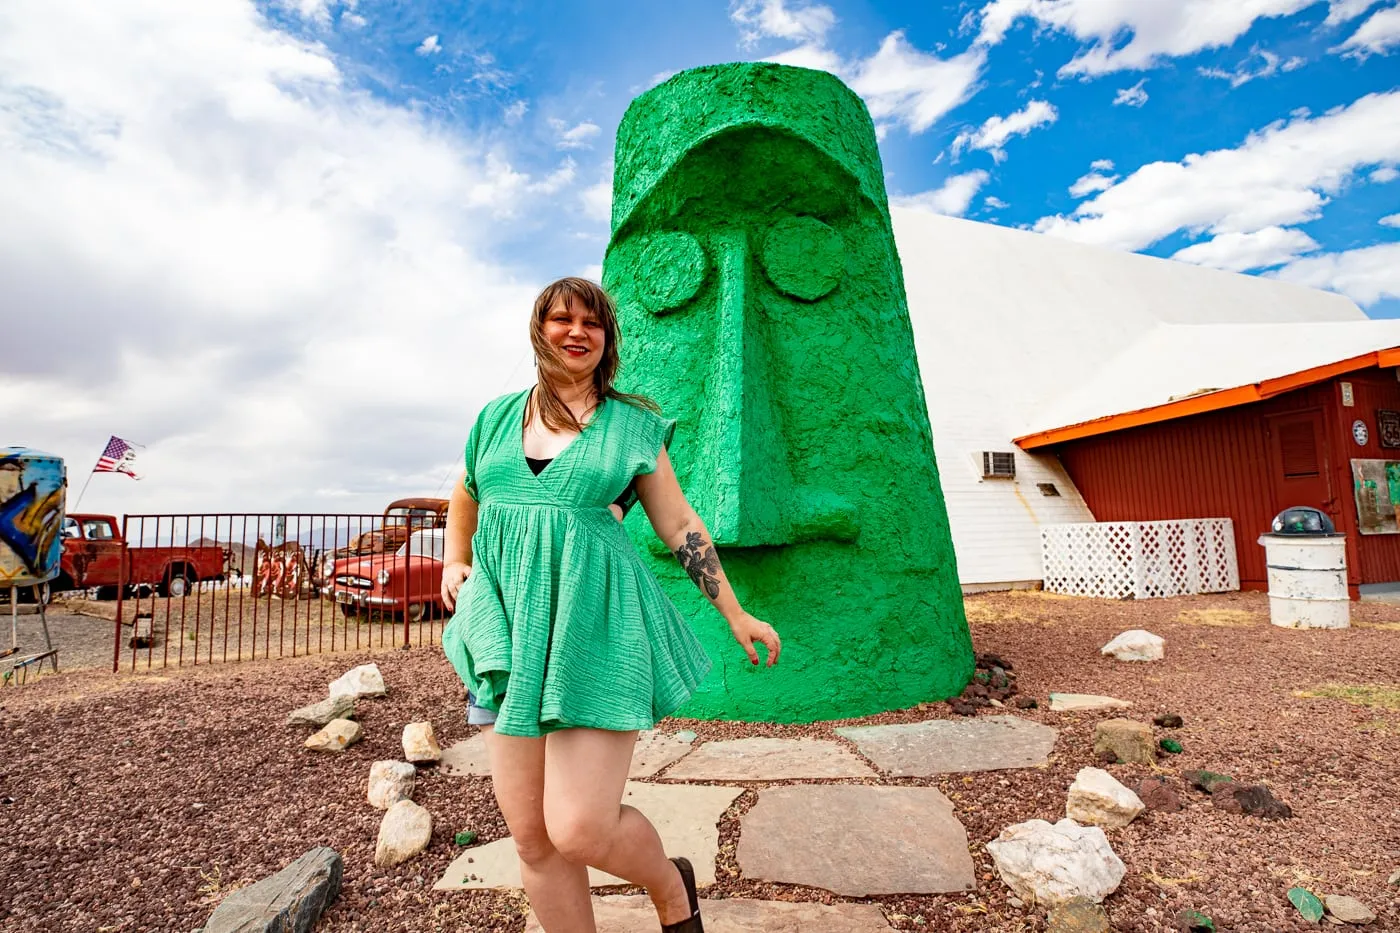 Giganticus Headicus in Kingman, Arizona: Big Green Head on Route 66 Roadside Attraction at Antares Point Visitor Center & Gift Shop 